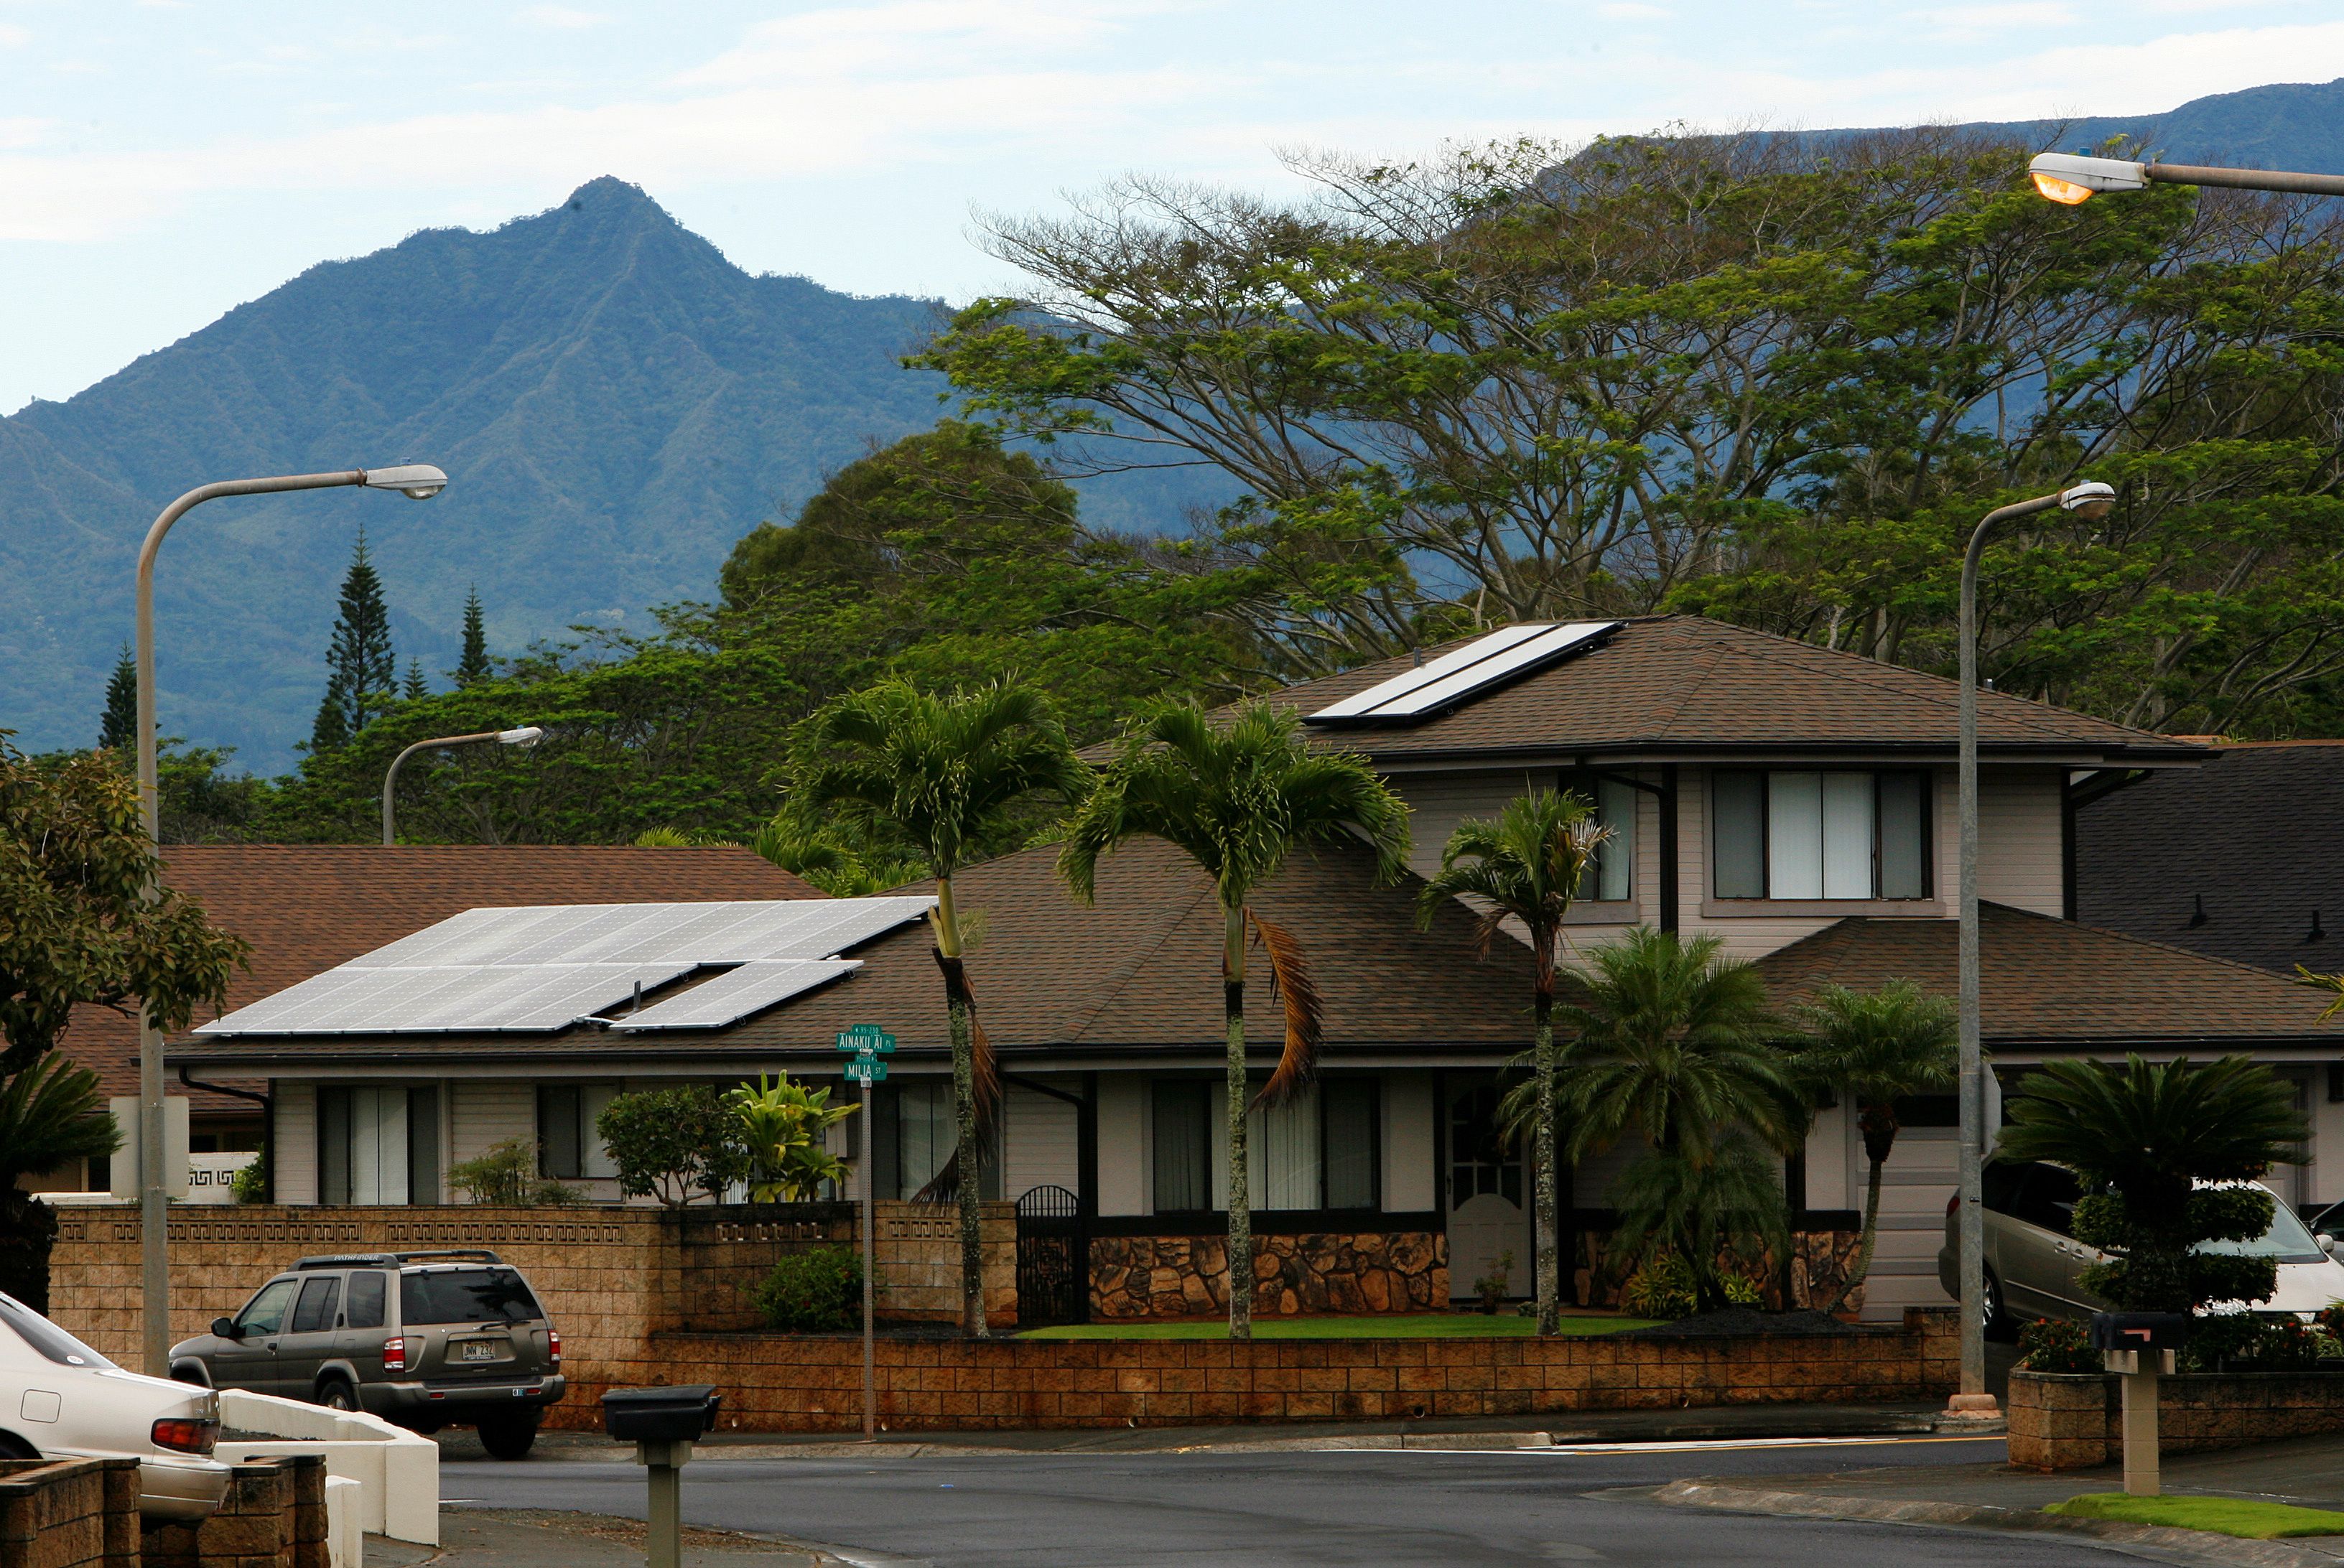 Homes with solar panels in the Mililani neighborhood on the island of Oahu in Mililani, Hawaii (REUTERS/Hugh Gentry) 